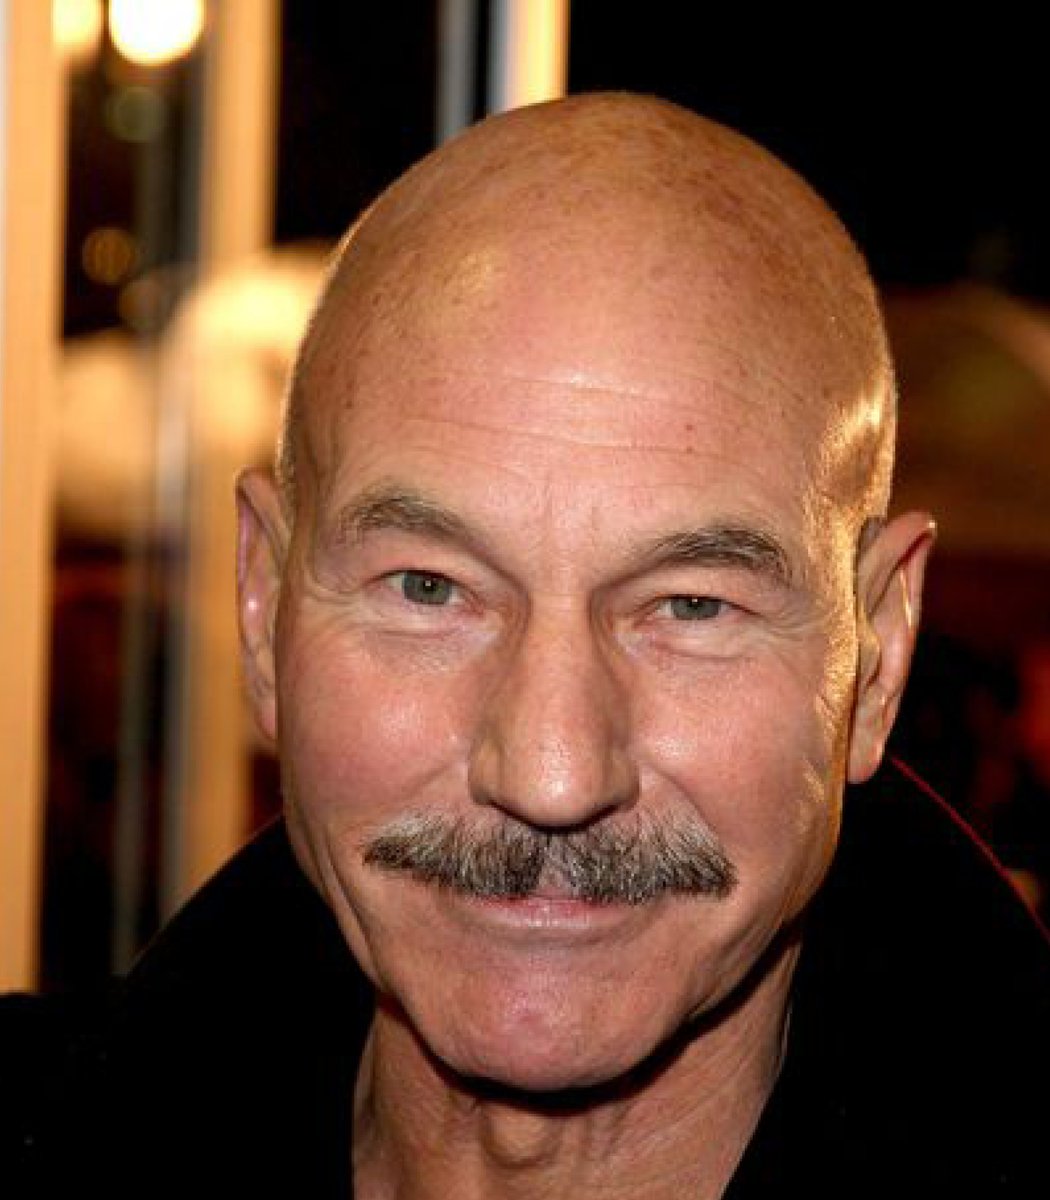 Patrick Stewart as objects in our collection — a thread @SirPatStew